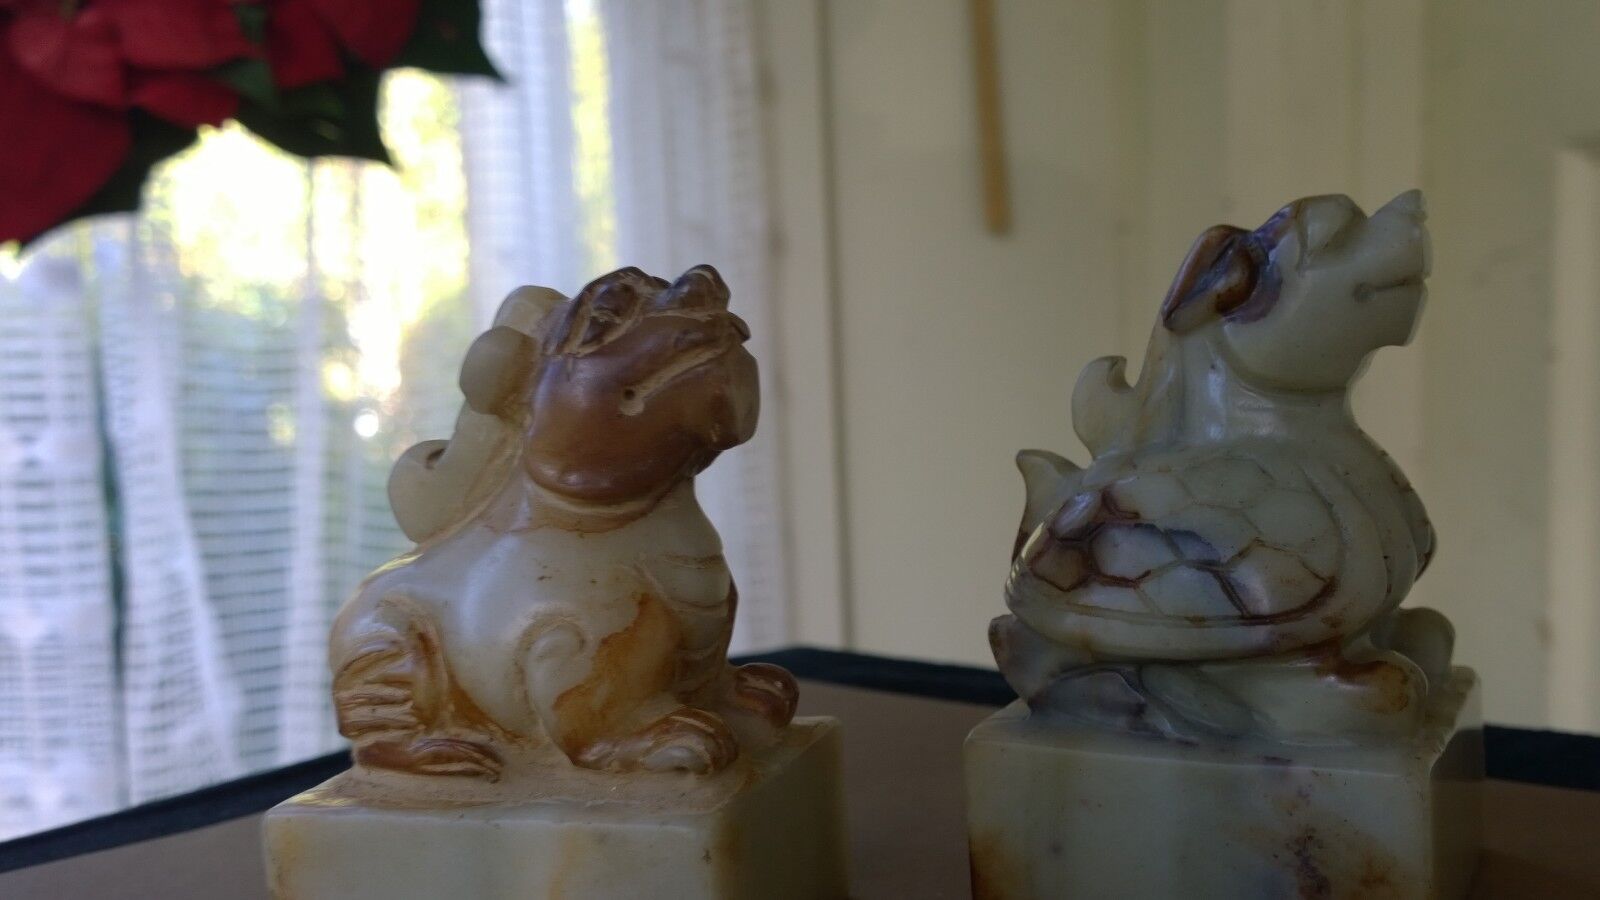 Group of Two Bixie Chop Seal Statues Carved of Hardstone Serpentine 488gr+399gr. Без бренда - фотография #9